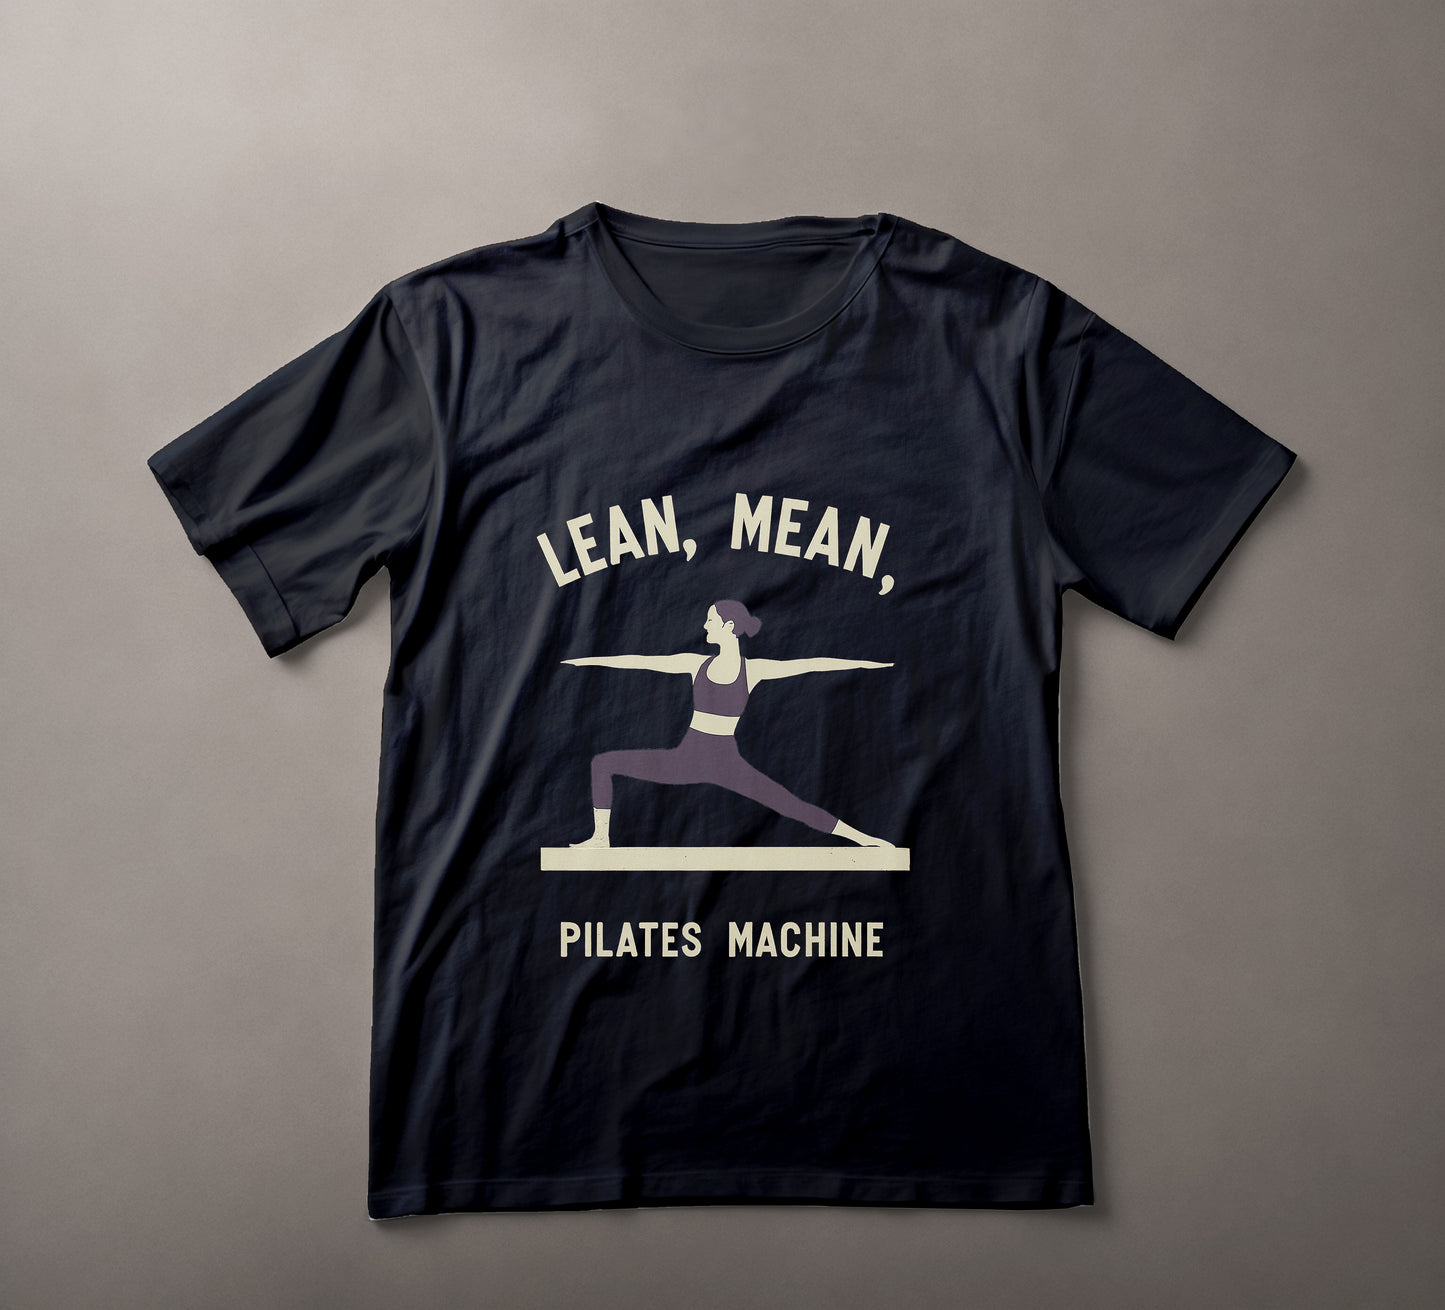 Pilates Fitness Tee, Workout Motivation Shirt, Lean Mean Gym Wear, Pilates Machine Apparel, Fitness Enthusiast Clothing, Fun Exercise T-Shirt, Pilates Class Gear, Strength and Flexibility Top, Casual Fitness Fashion, Pilates Instructor Shirt, Core Workout Tee